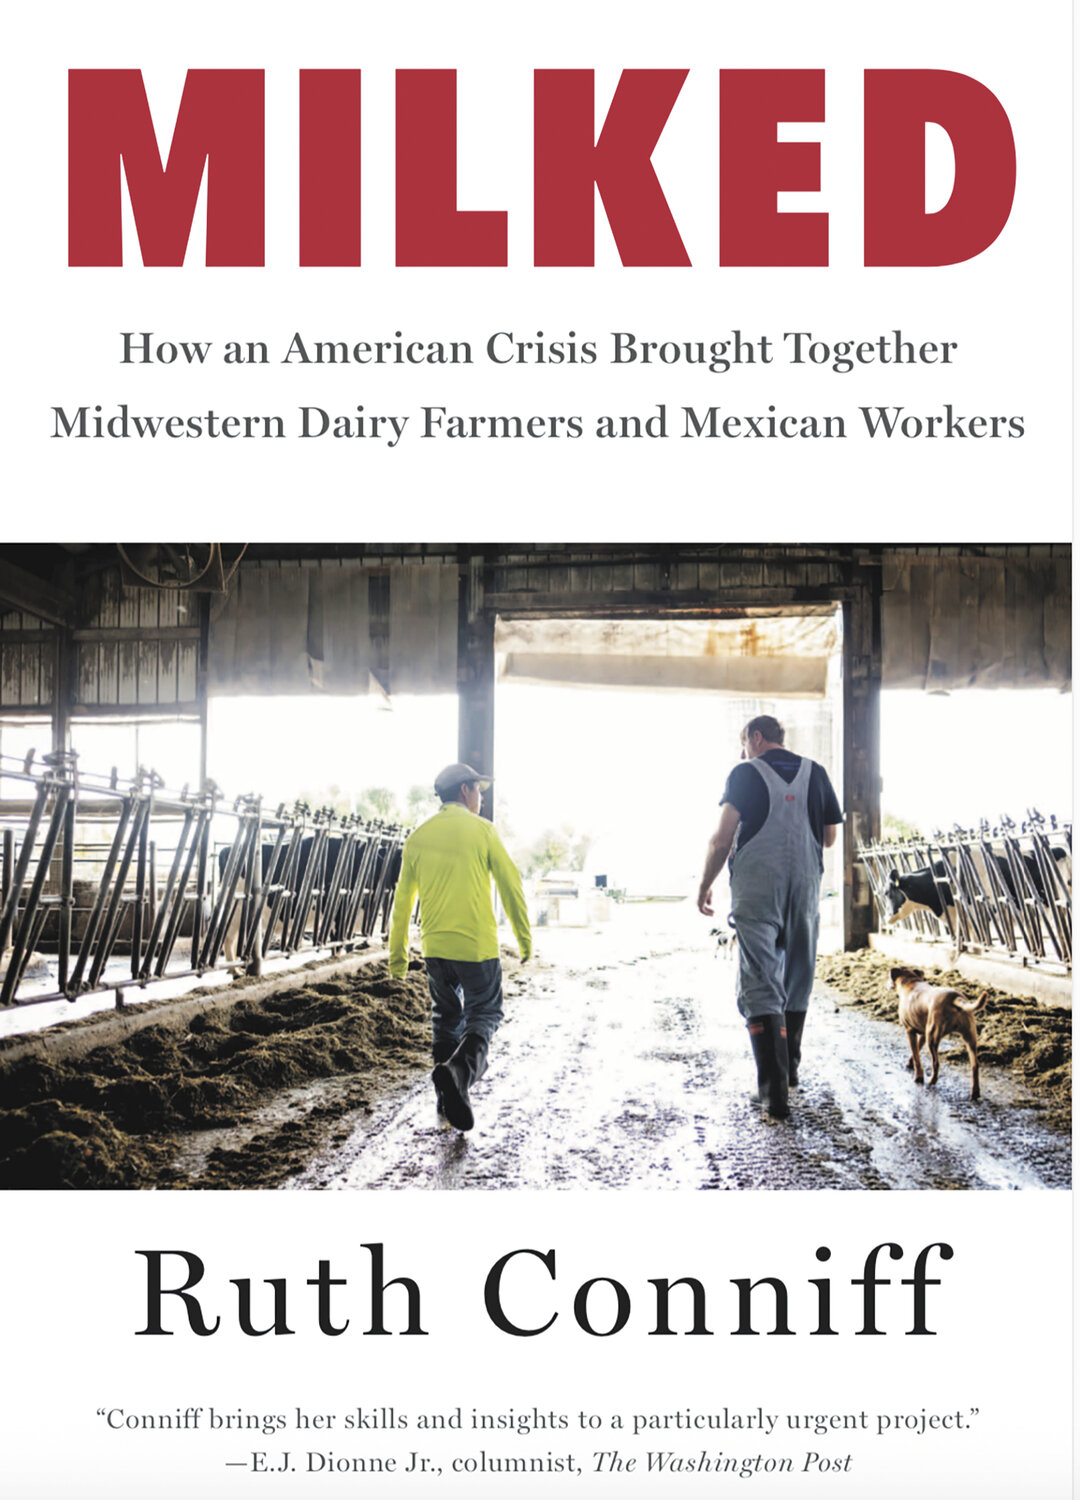 The cover art of “Milked,” by Ruth Conniff, pictures a dairy farmer and an immigrant employee. The book approaches the topics of immigration policy, political leanings, pressure to expand, the idea of economically sustainable farms, racism and local food, all through the lens of the individual people who populate these interconnected themes.